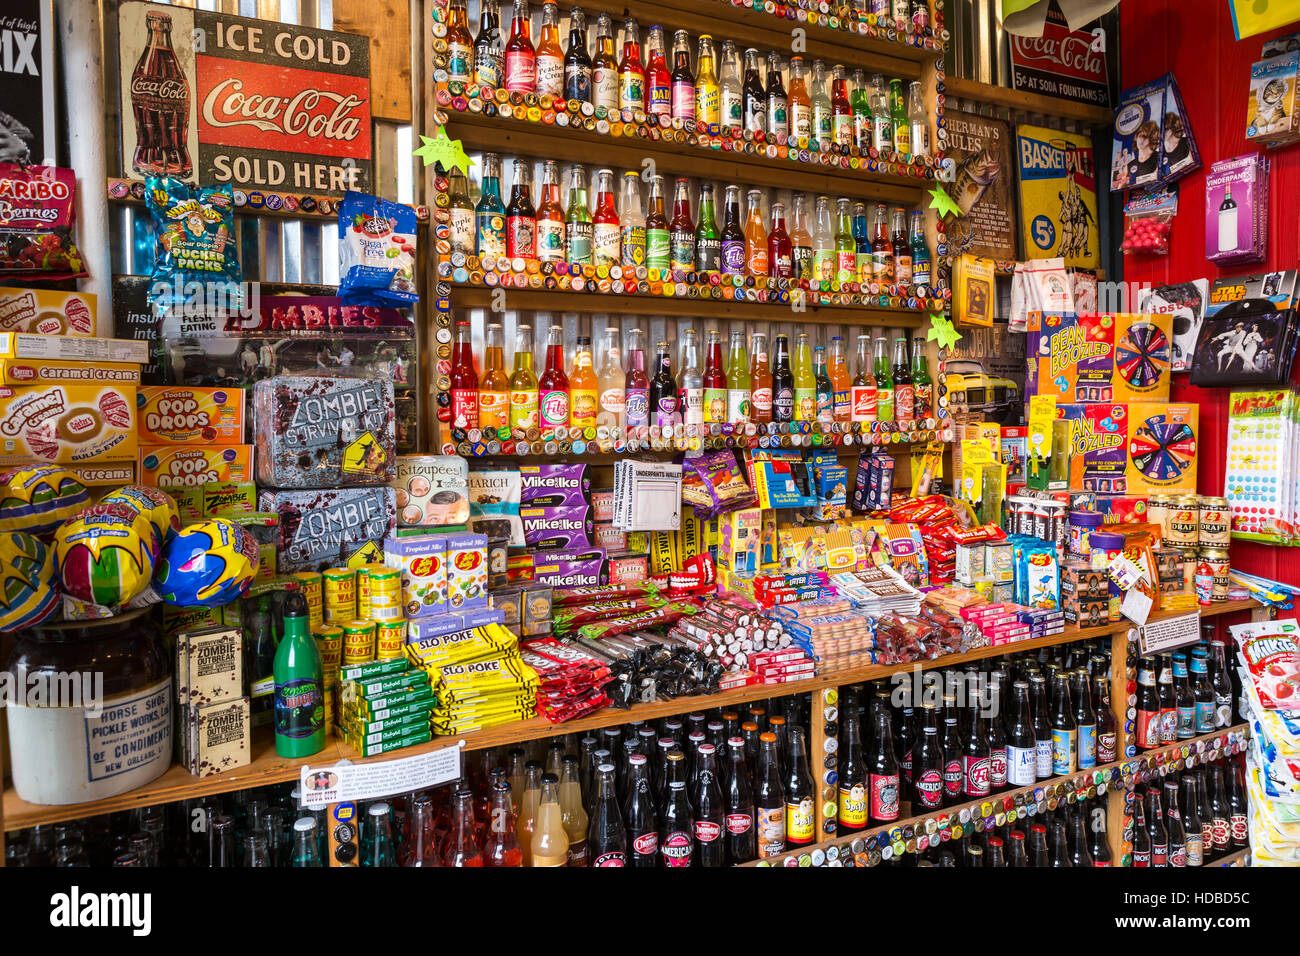 Soda Shop High Resolution Stock Photography and Images - Alamy